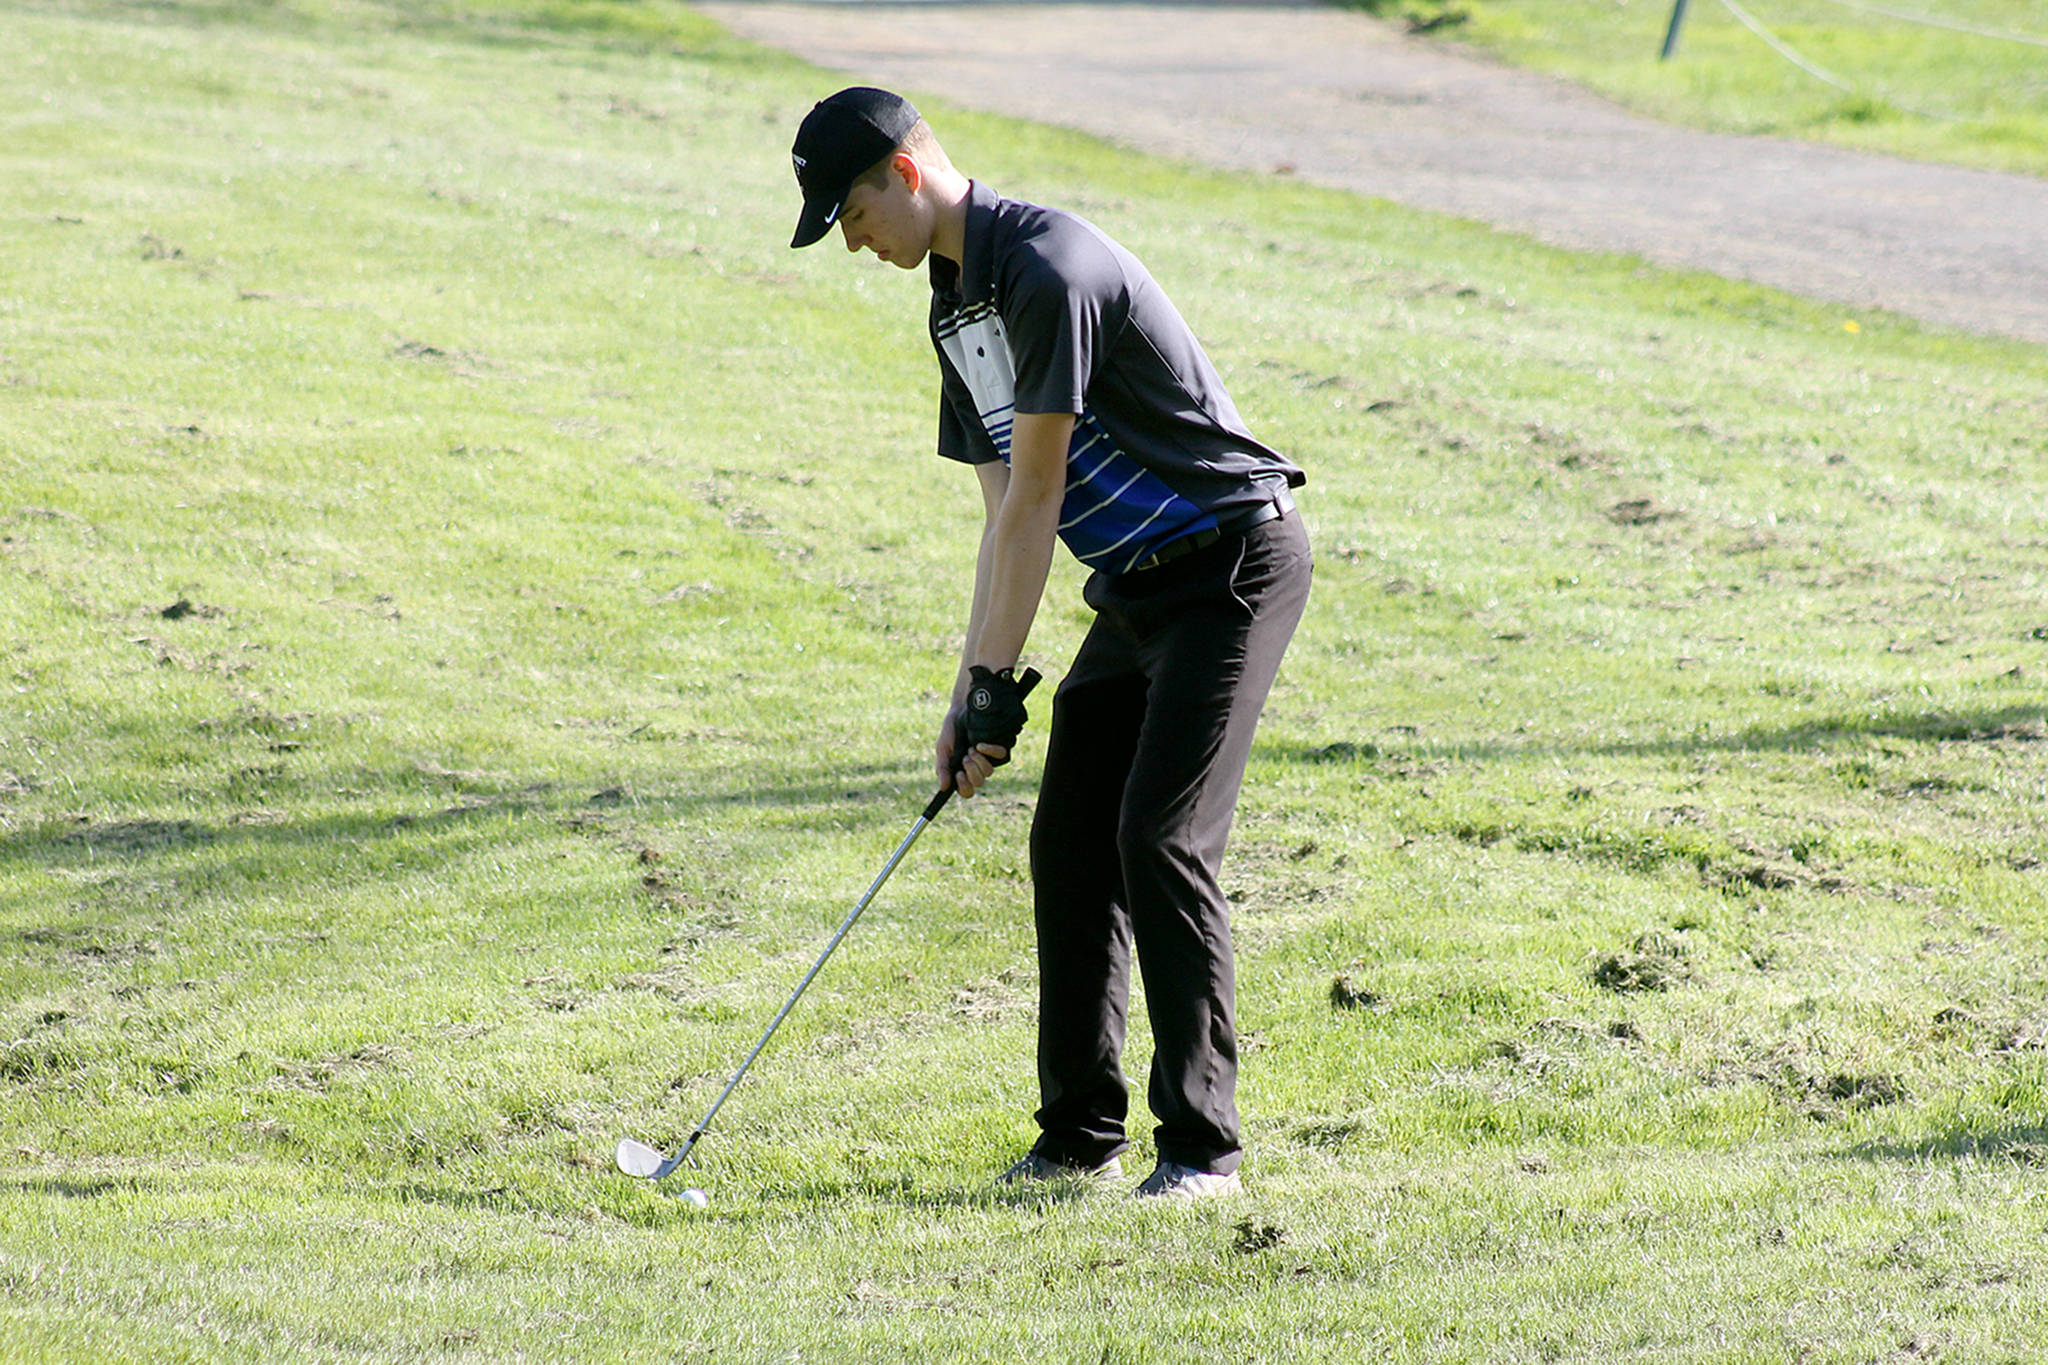 Boys golf wins home match, secures second place in league